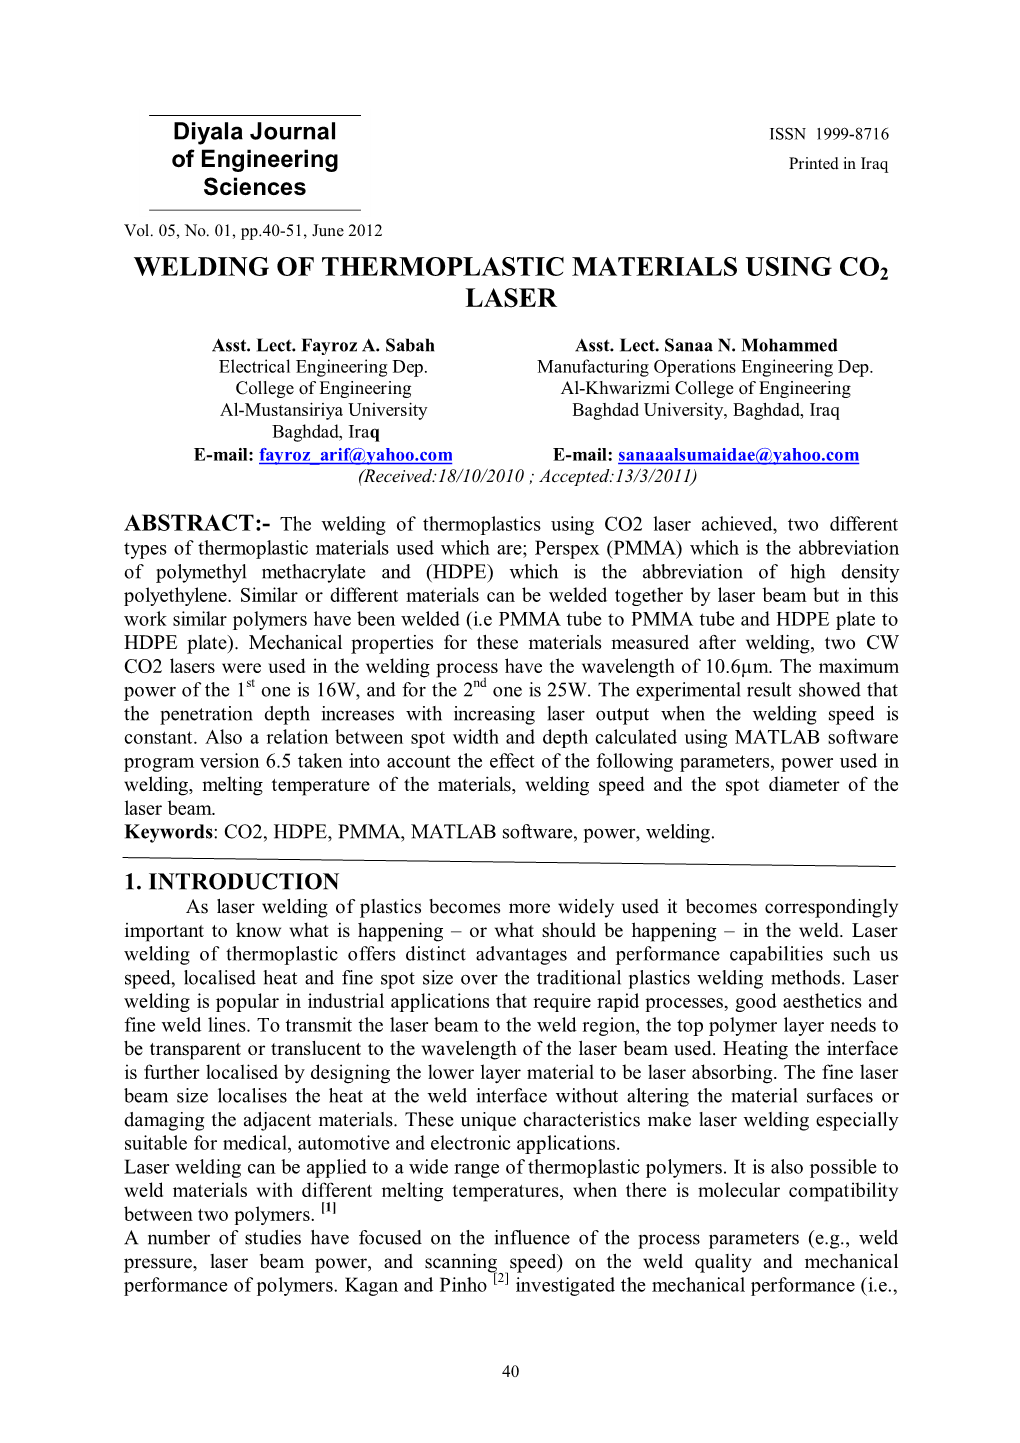 Welding of Thermoplastic Materials Using Co2 Laser